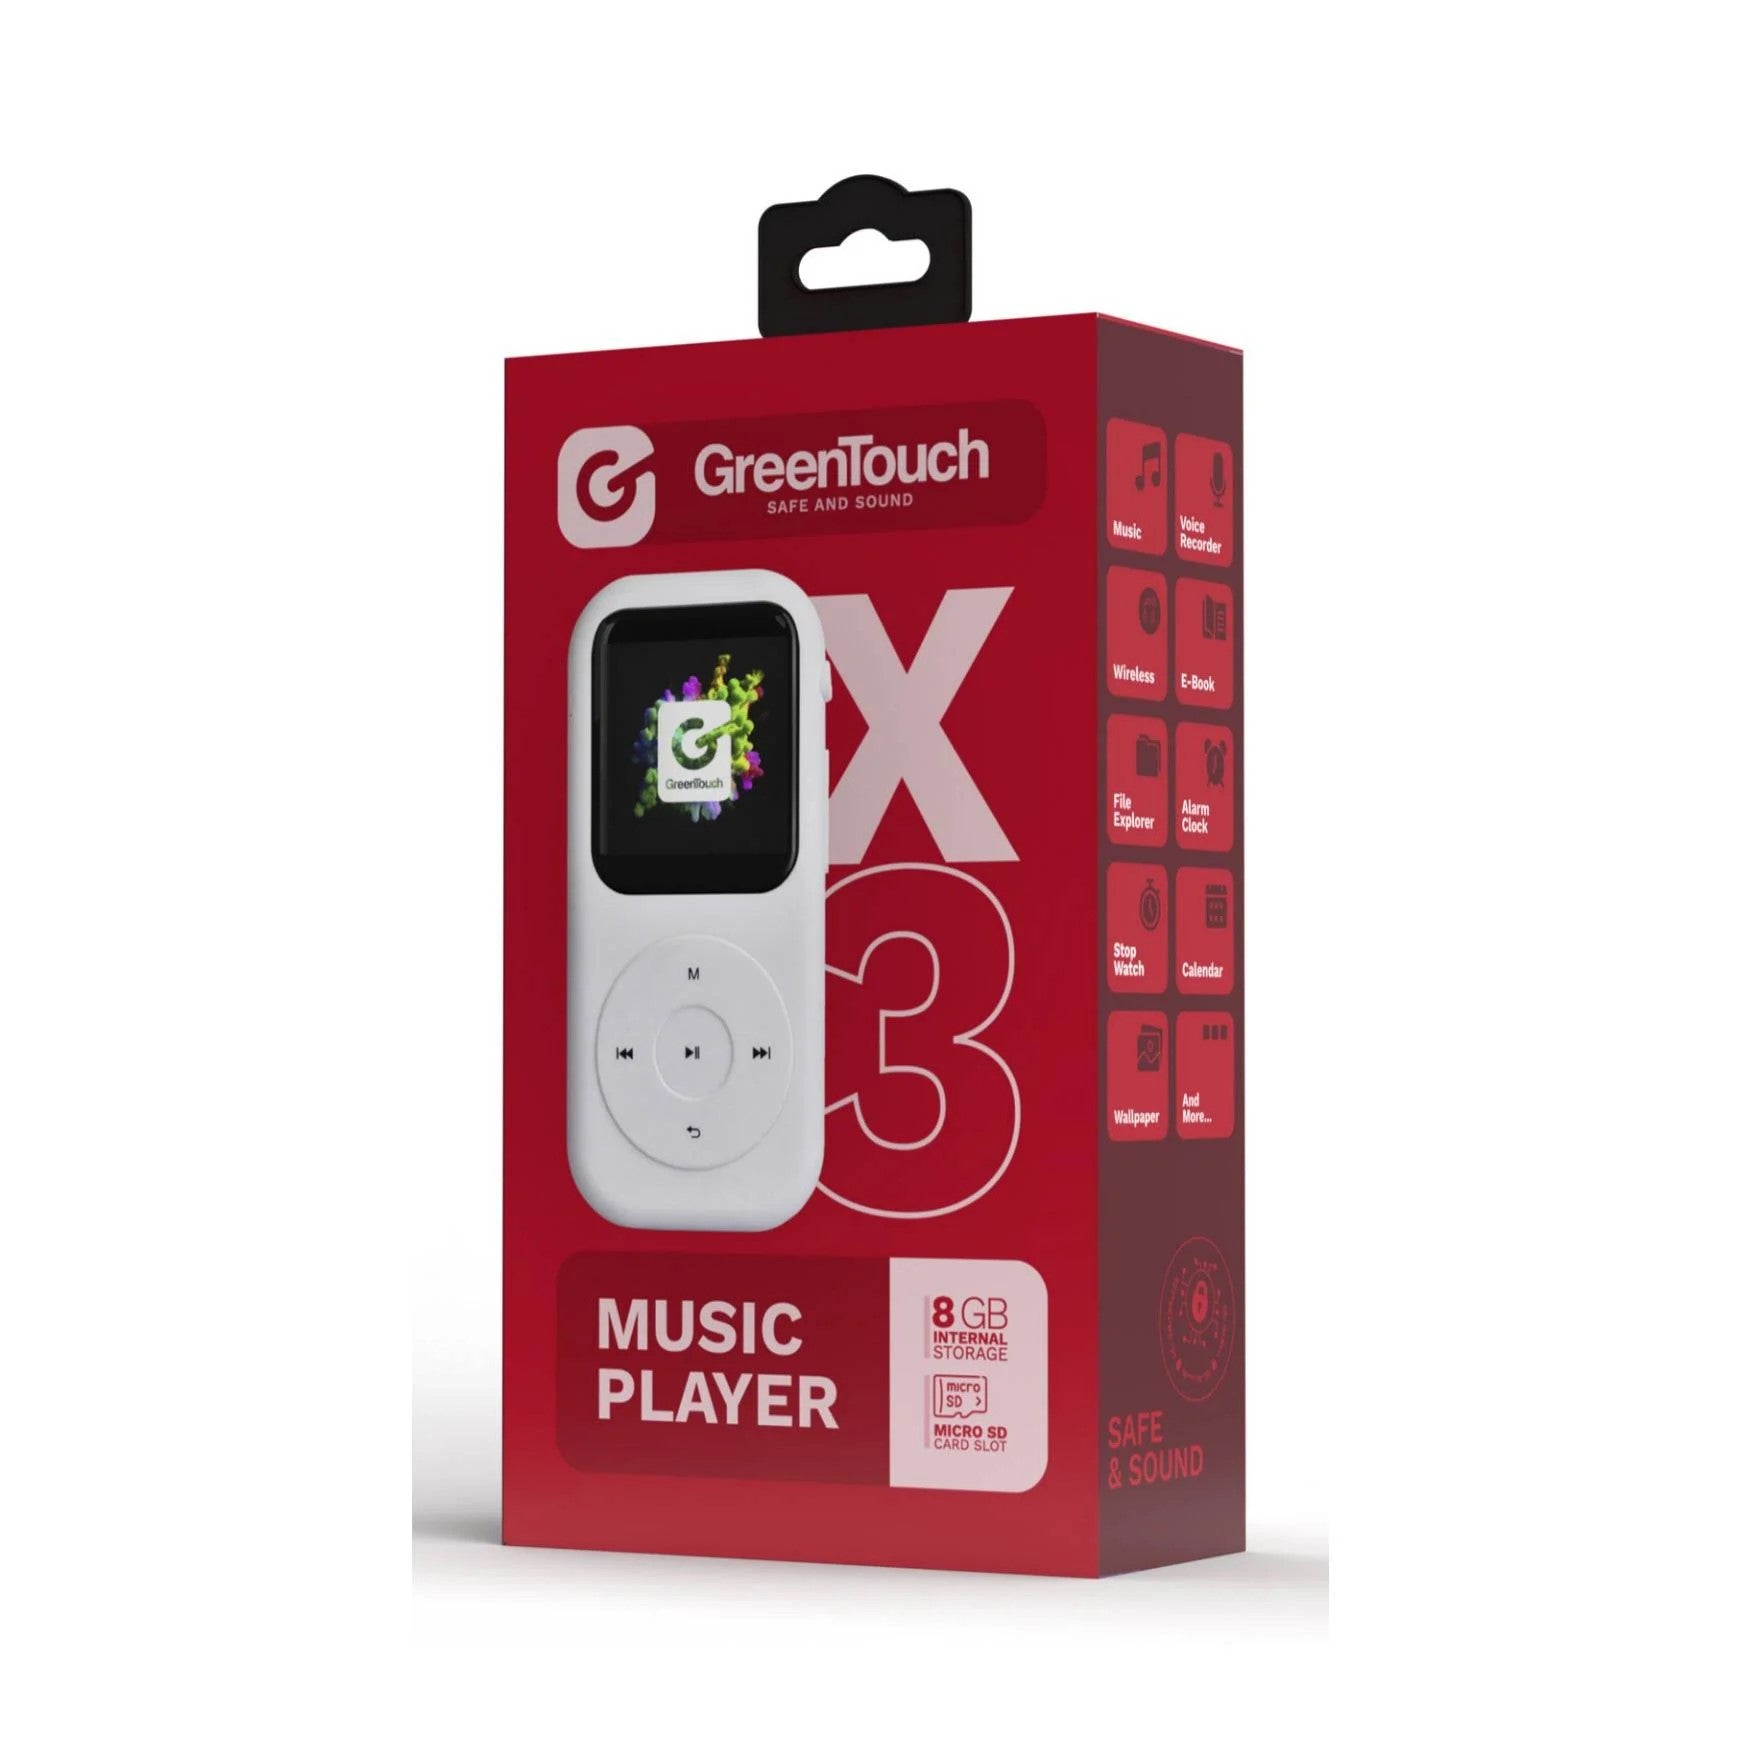 Greentouch X3 MP3 Player - White - 32GB